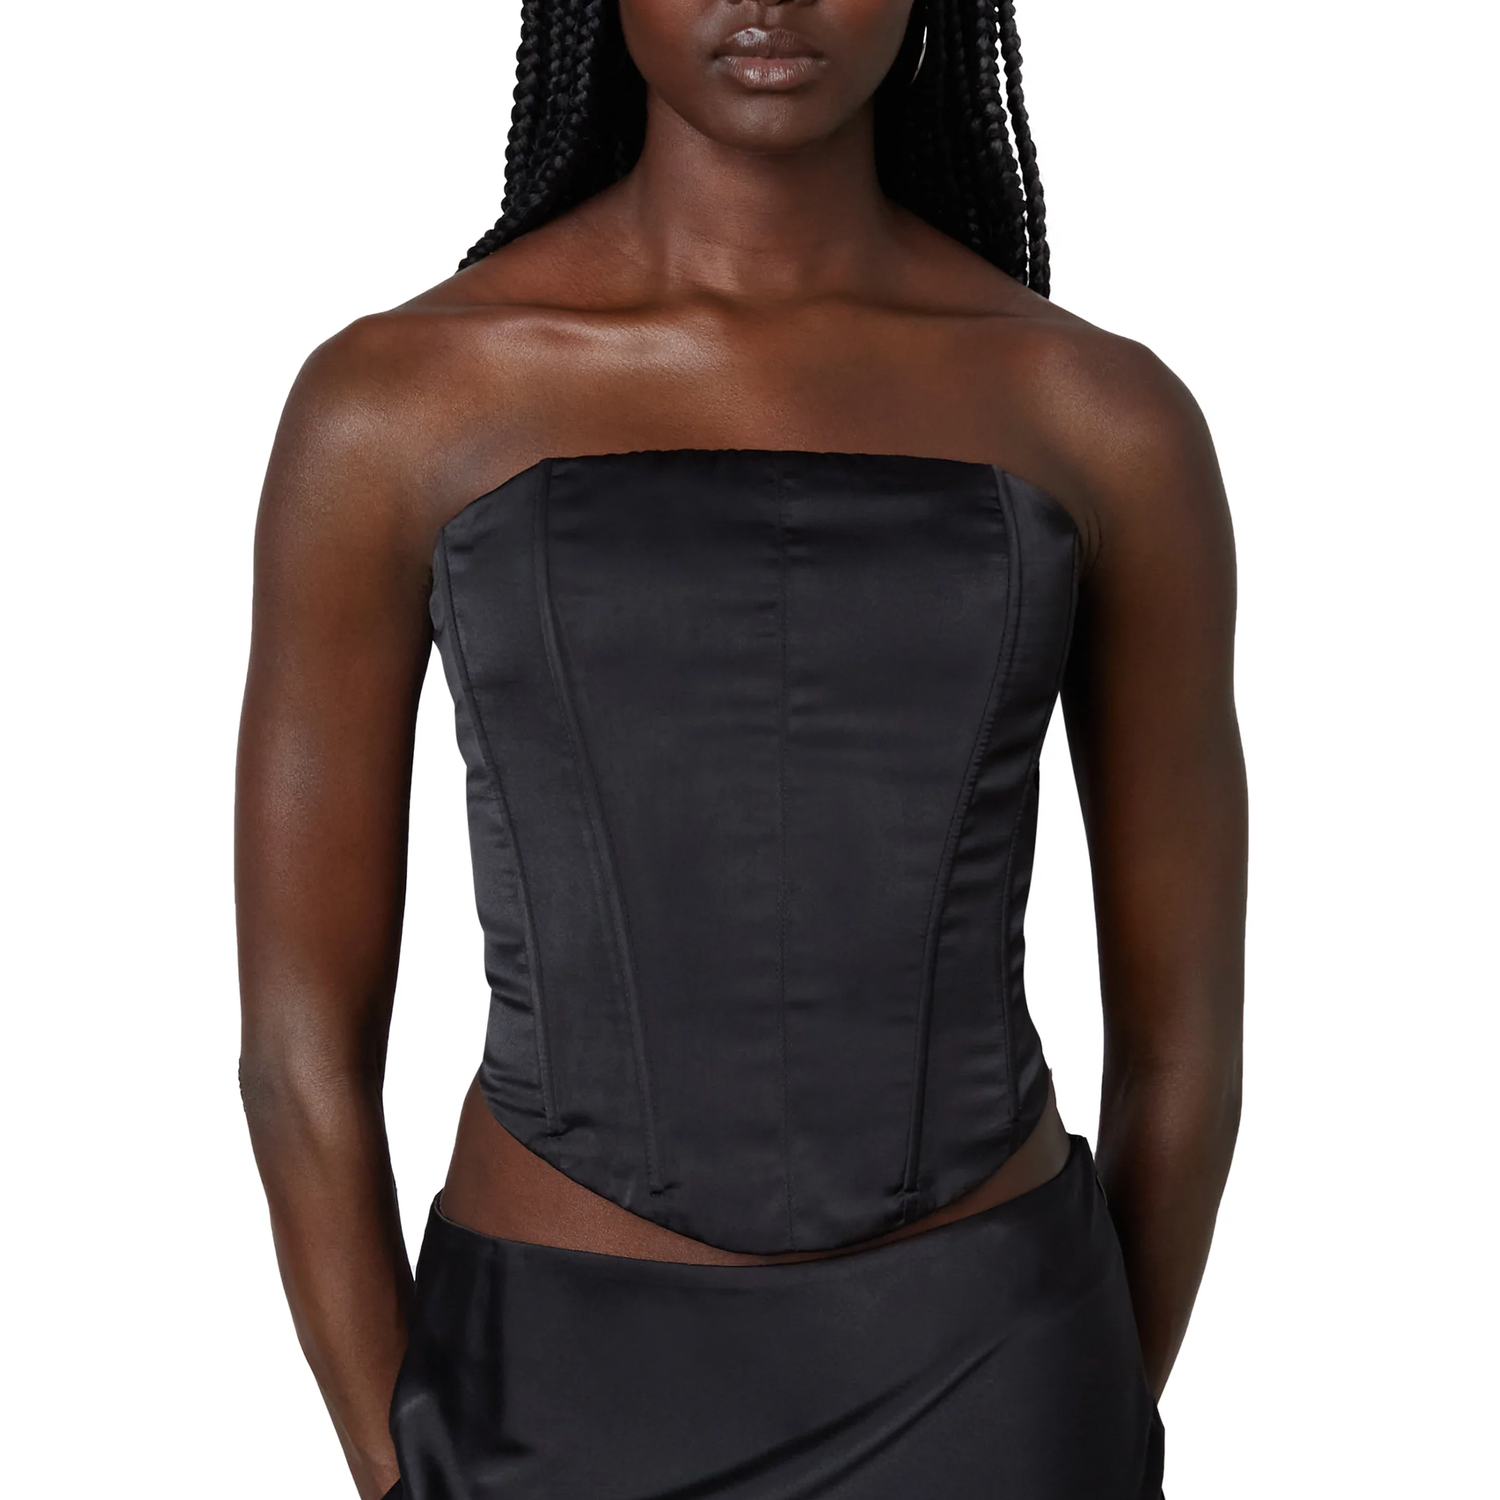 Marissa Corset. So cool and classic, this timeless corset top is featured in a fitted design with boning and back zipper closure